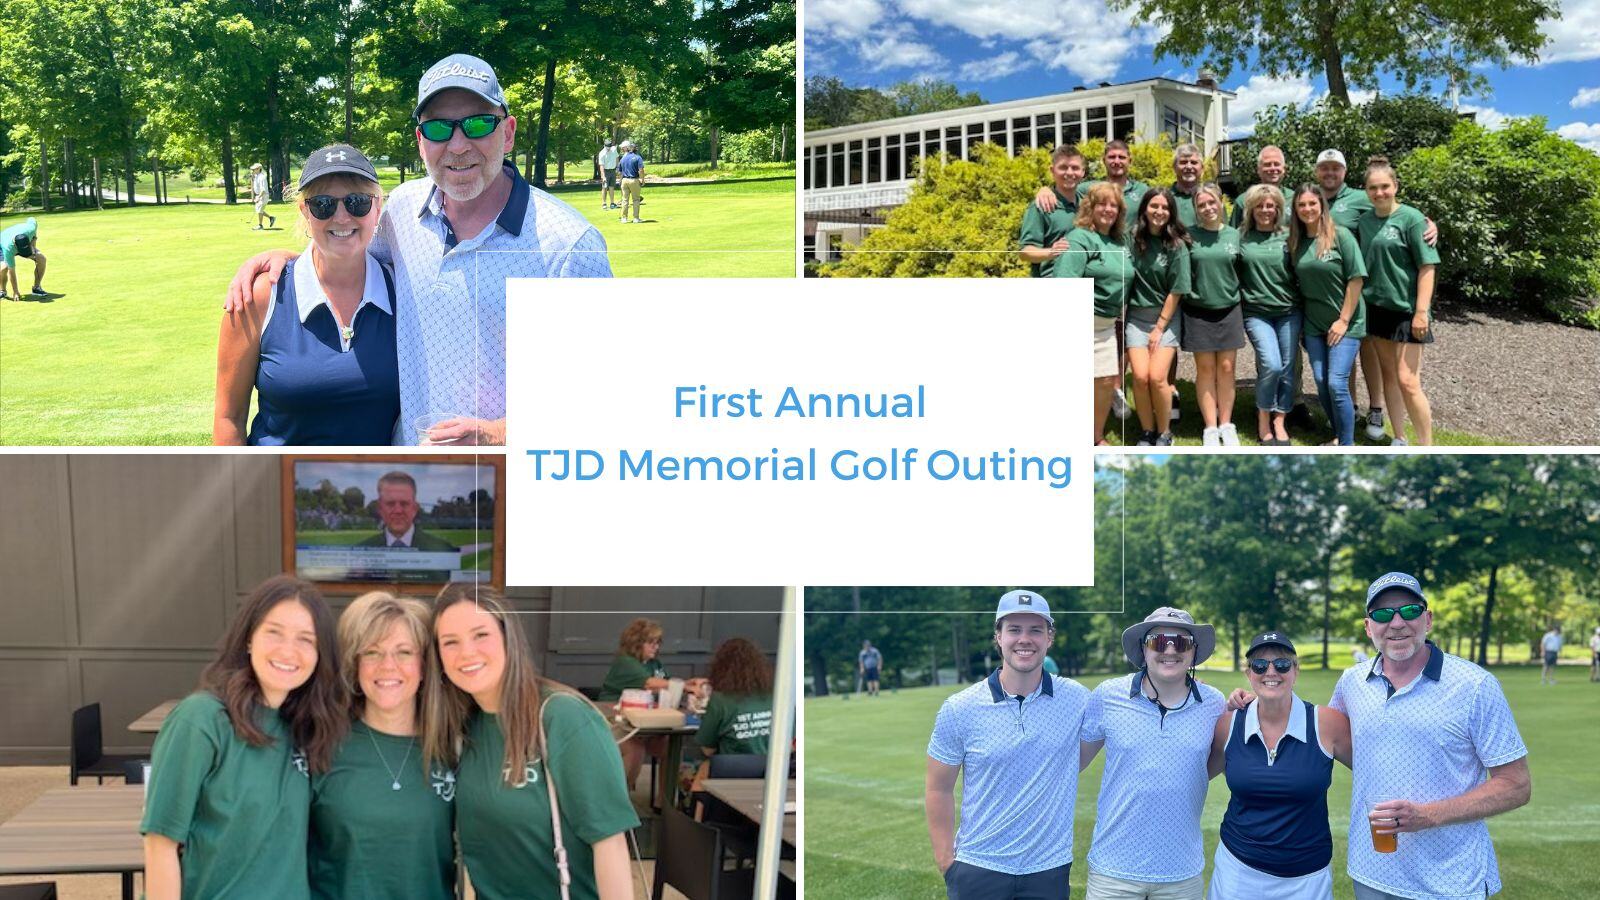 First Annual TJD Memorial Golf Outing